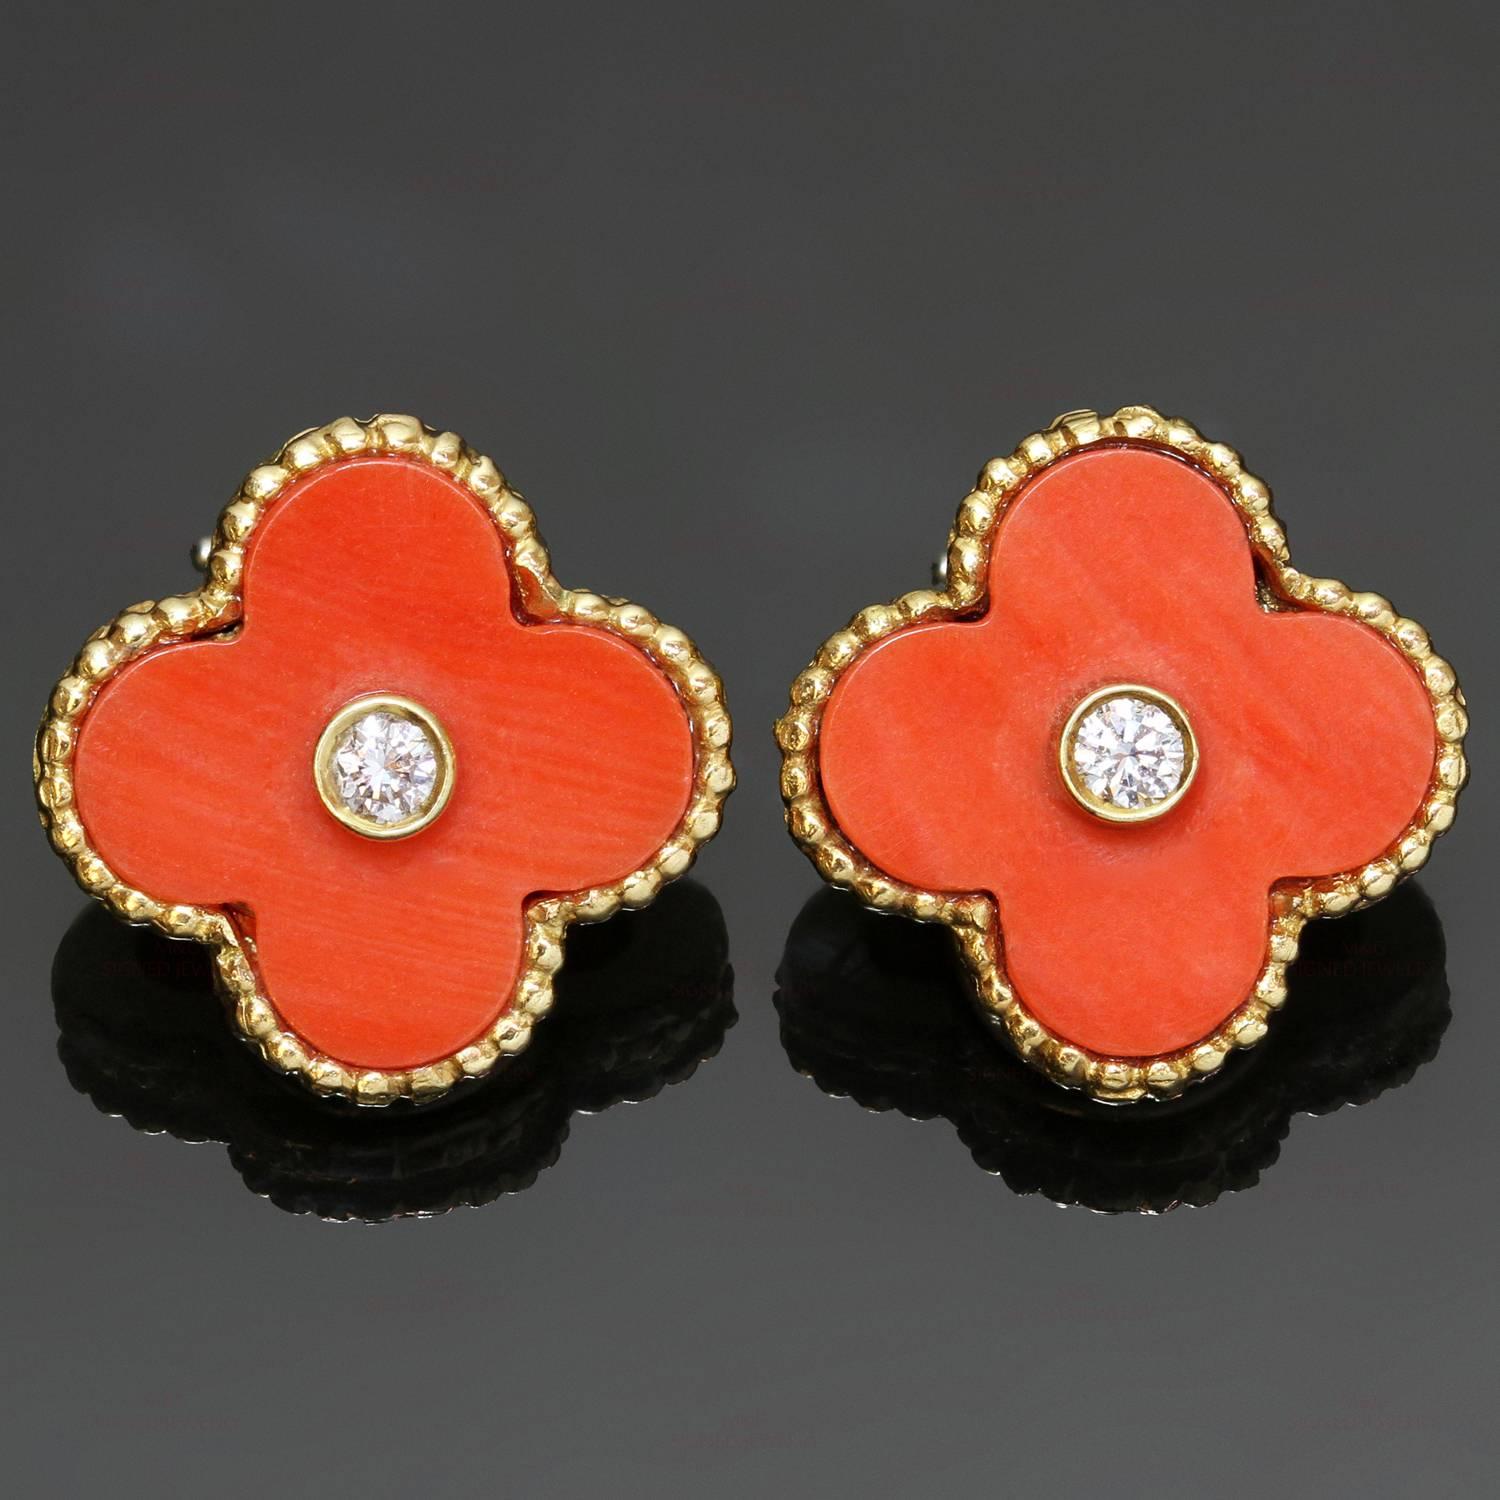 These extremely rare clip-on earrings from the Alhambra collection by Van Cleef & Arpels feature the iconic lucky clover motif crafted in 18k yellow gold and set with orange-red corals with strong saturation and medium tone and brilliant-cut round